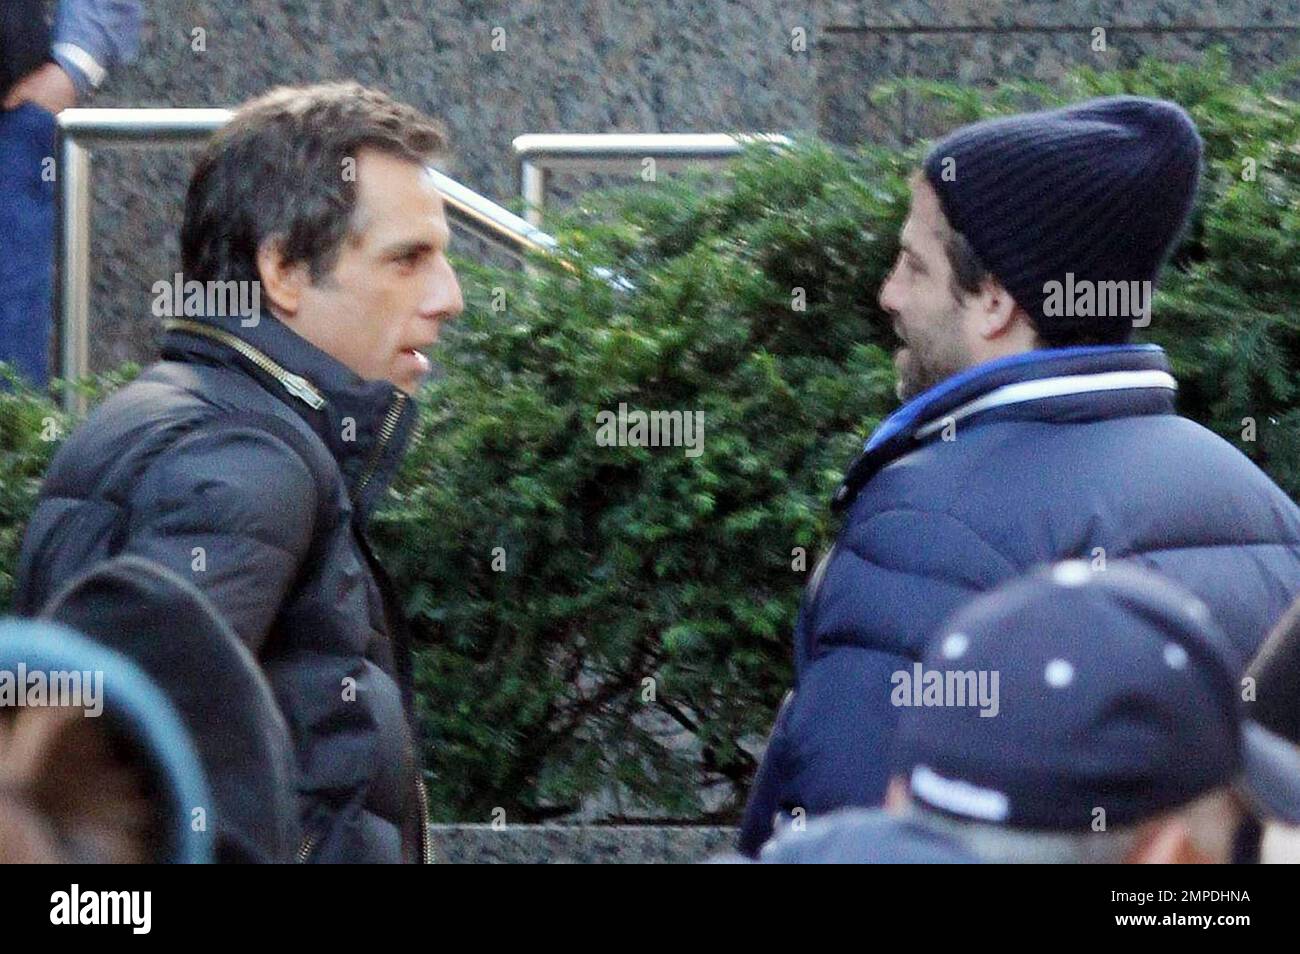 Actor Ben Stiller on the set of 'Tower Heist' directed by Brett Ratner and co-starring Eddie Murphy, Casey Affleck and Ta Leoni. New York, NY. 11/10/10. Stock Photo